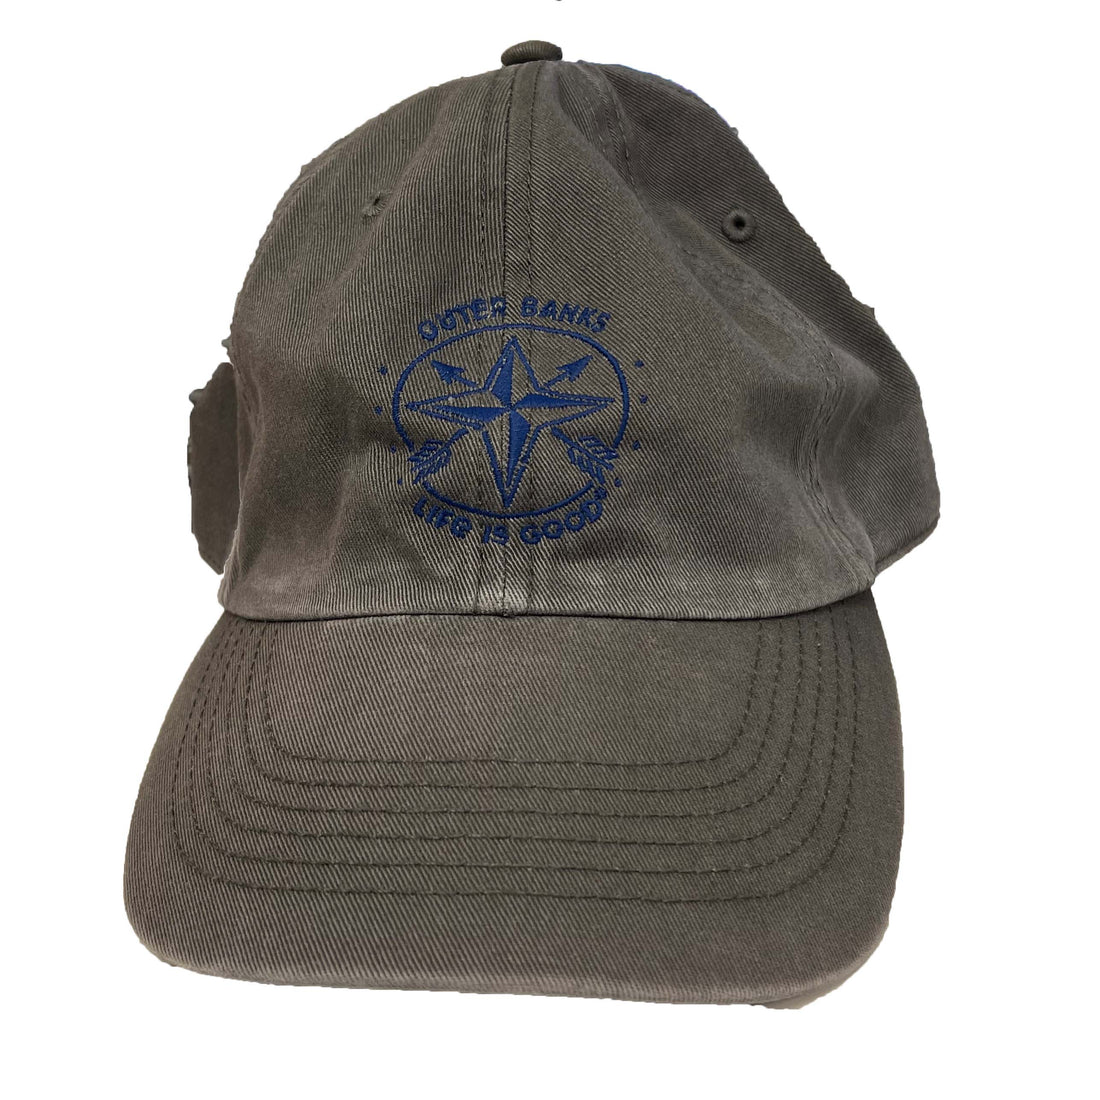 Life Is Good - Outer Banks Outer Banks Chill Hat